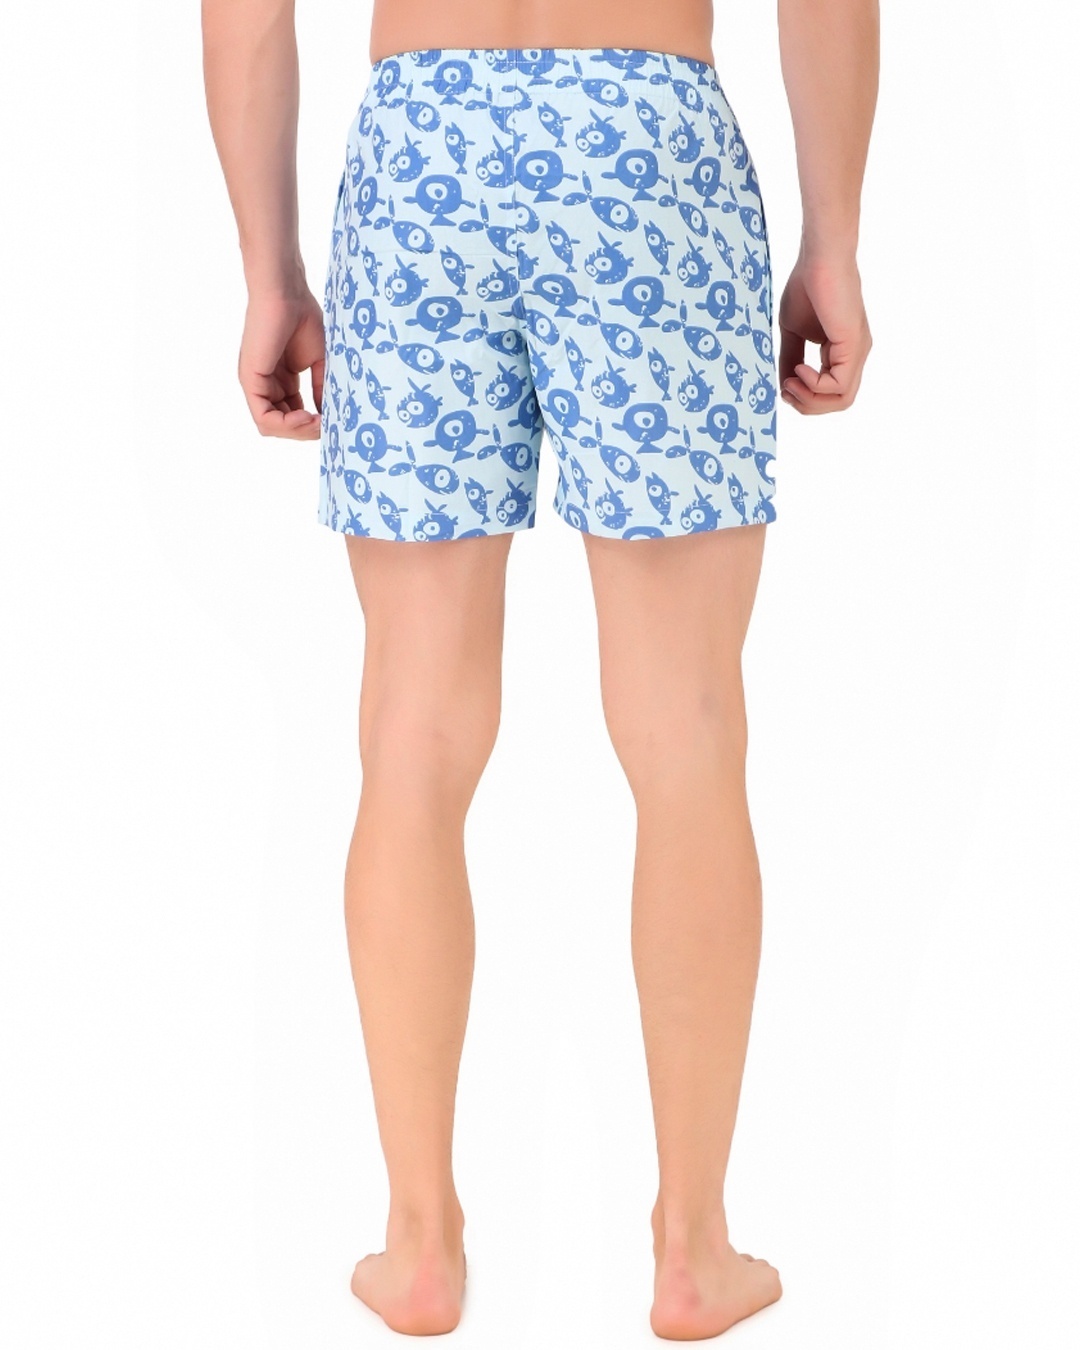 Buy Men's Blue All Over Fish Printed Cotton Boxers Online in India at ...